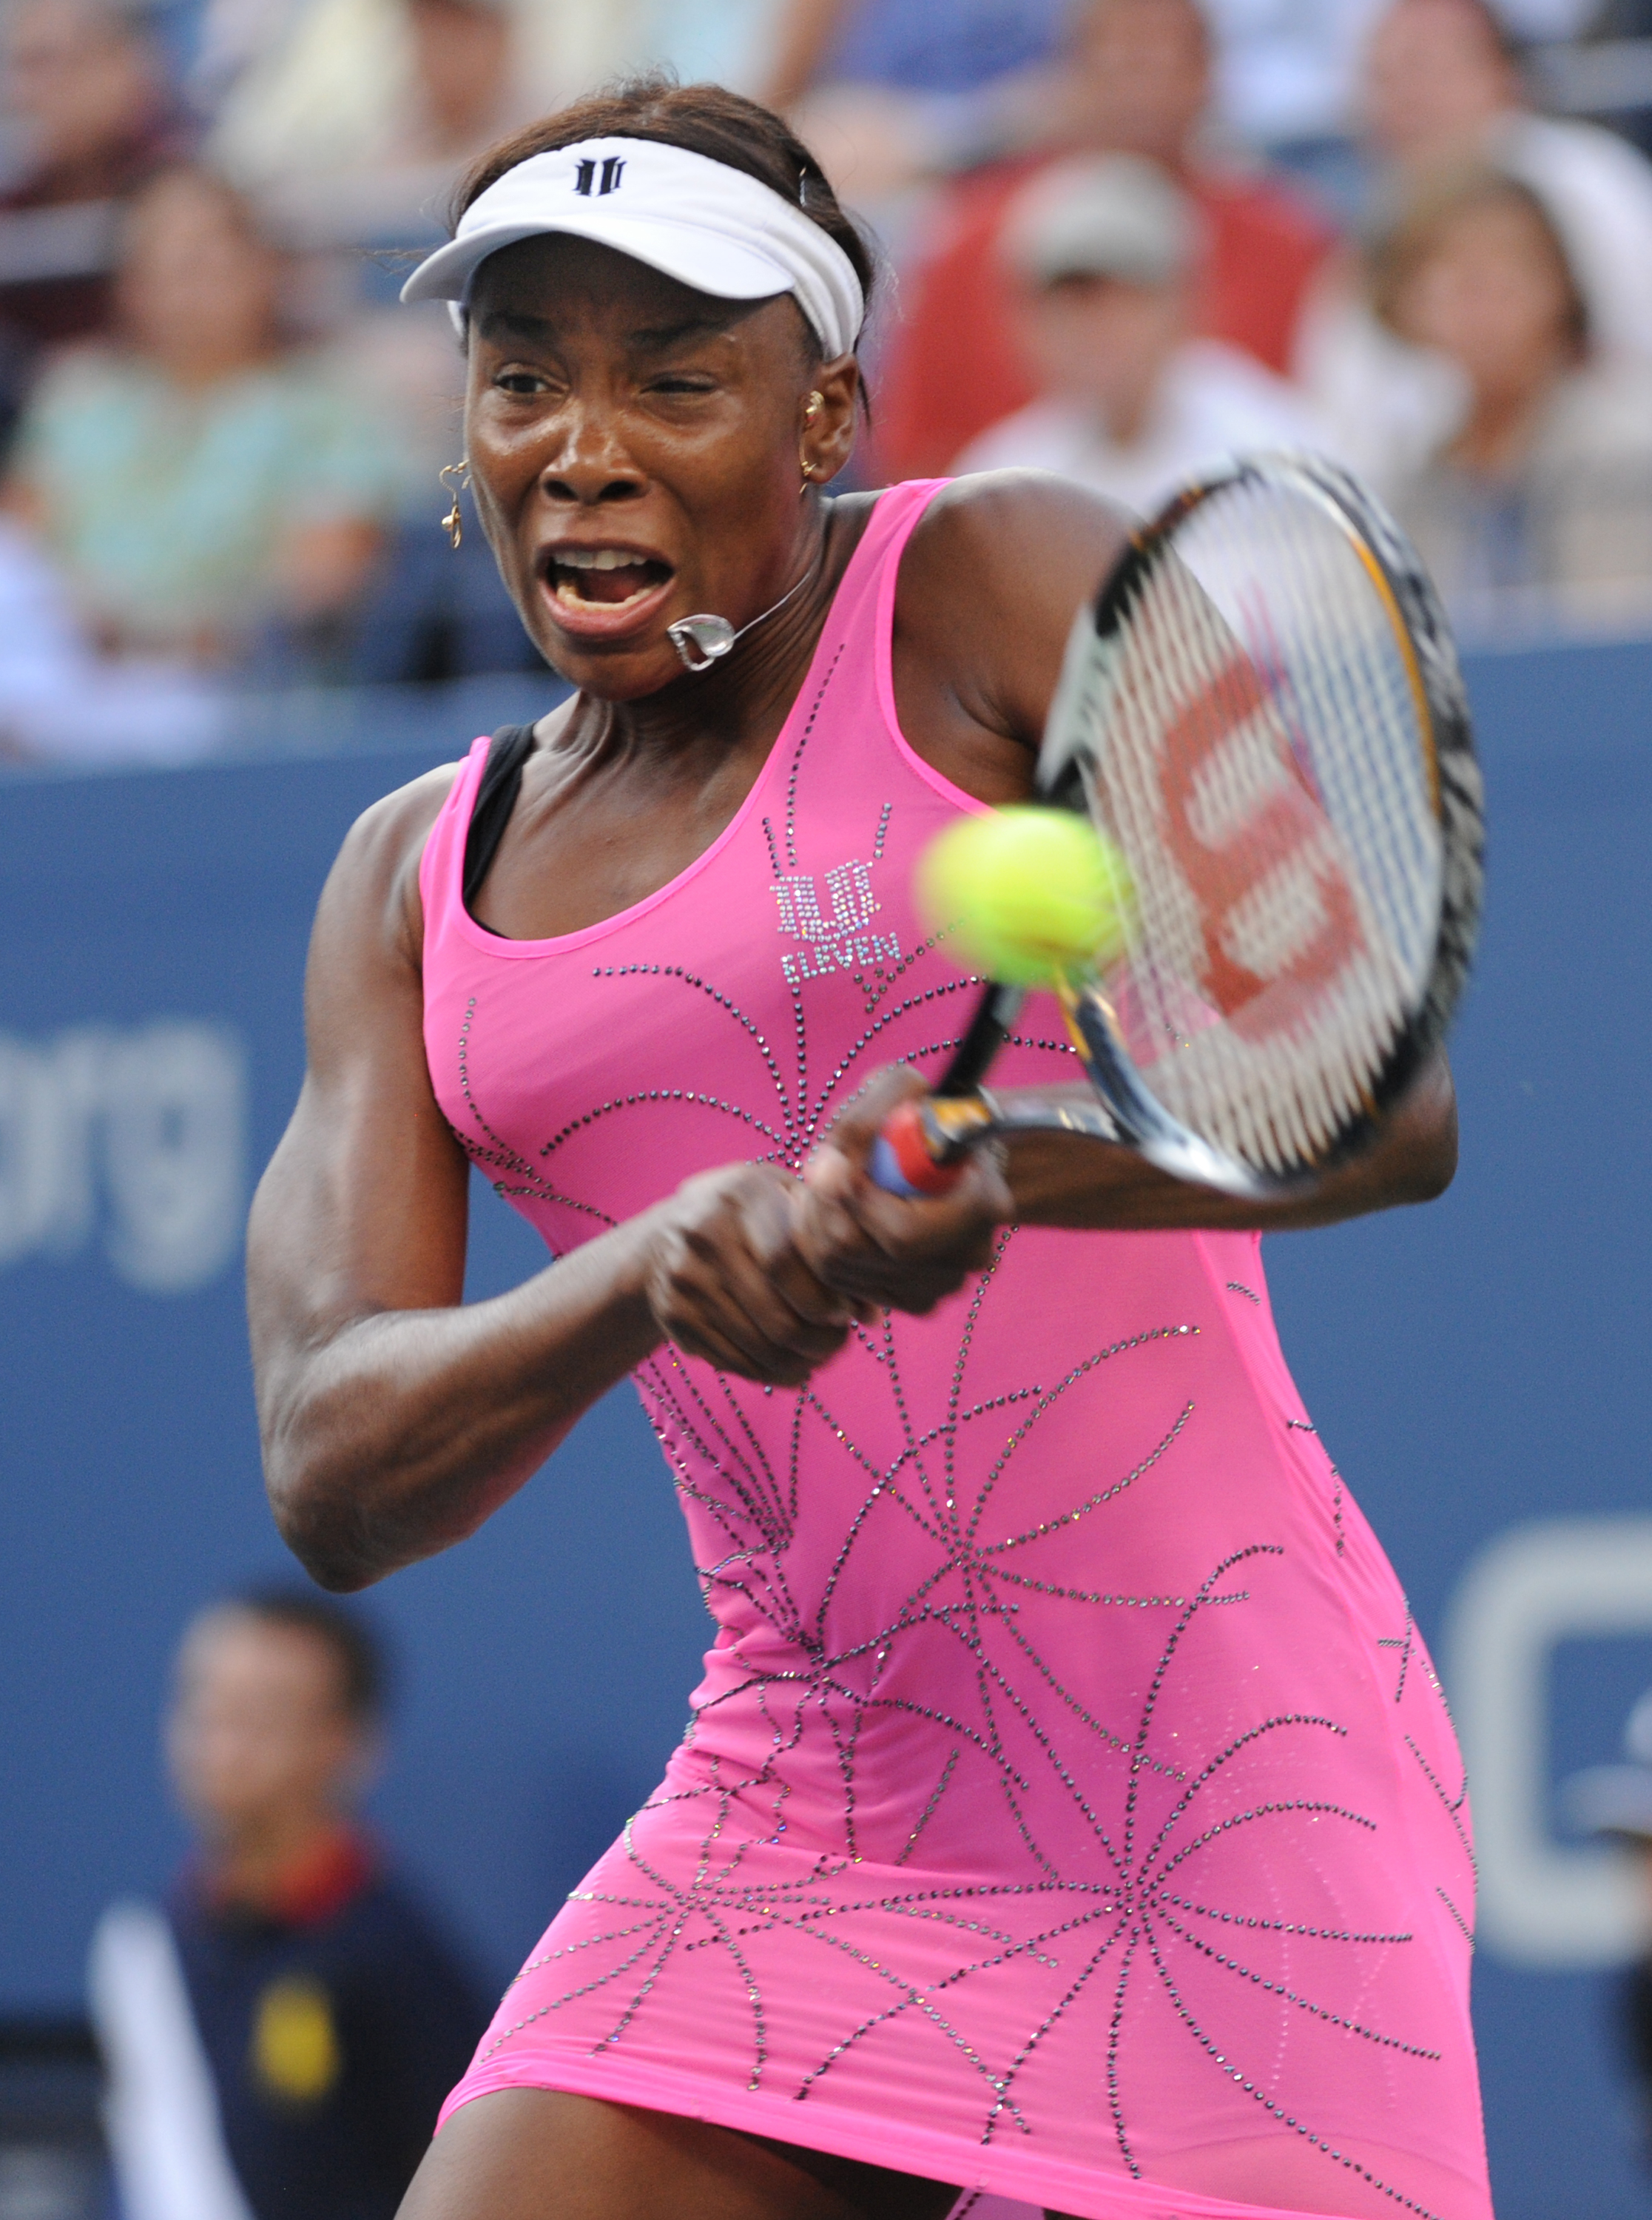 Venus Williams at the US Open 2010 tennis tournament September 7, 2010 in New York. | Source: Getty Images